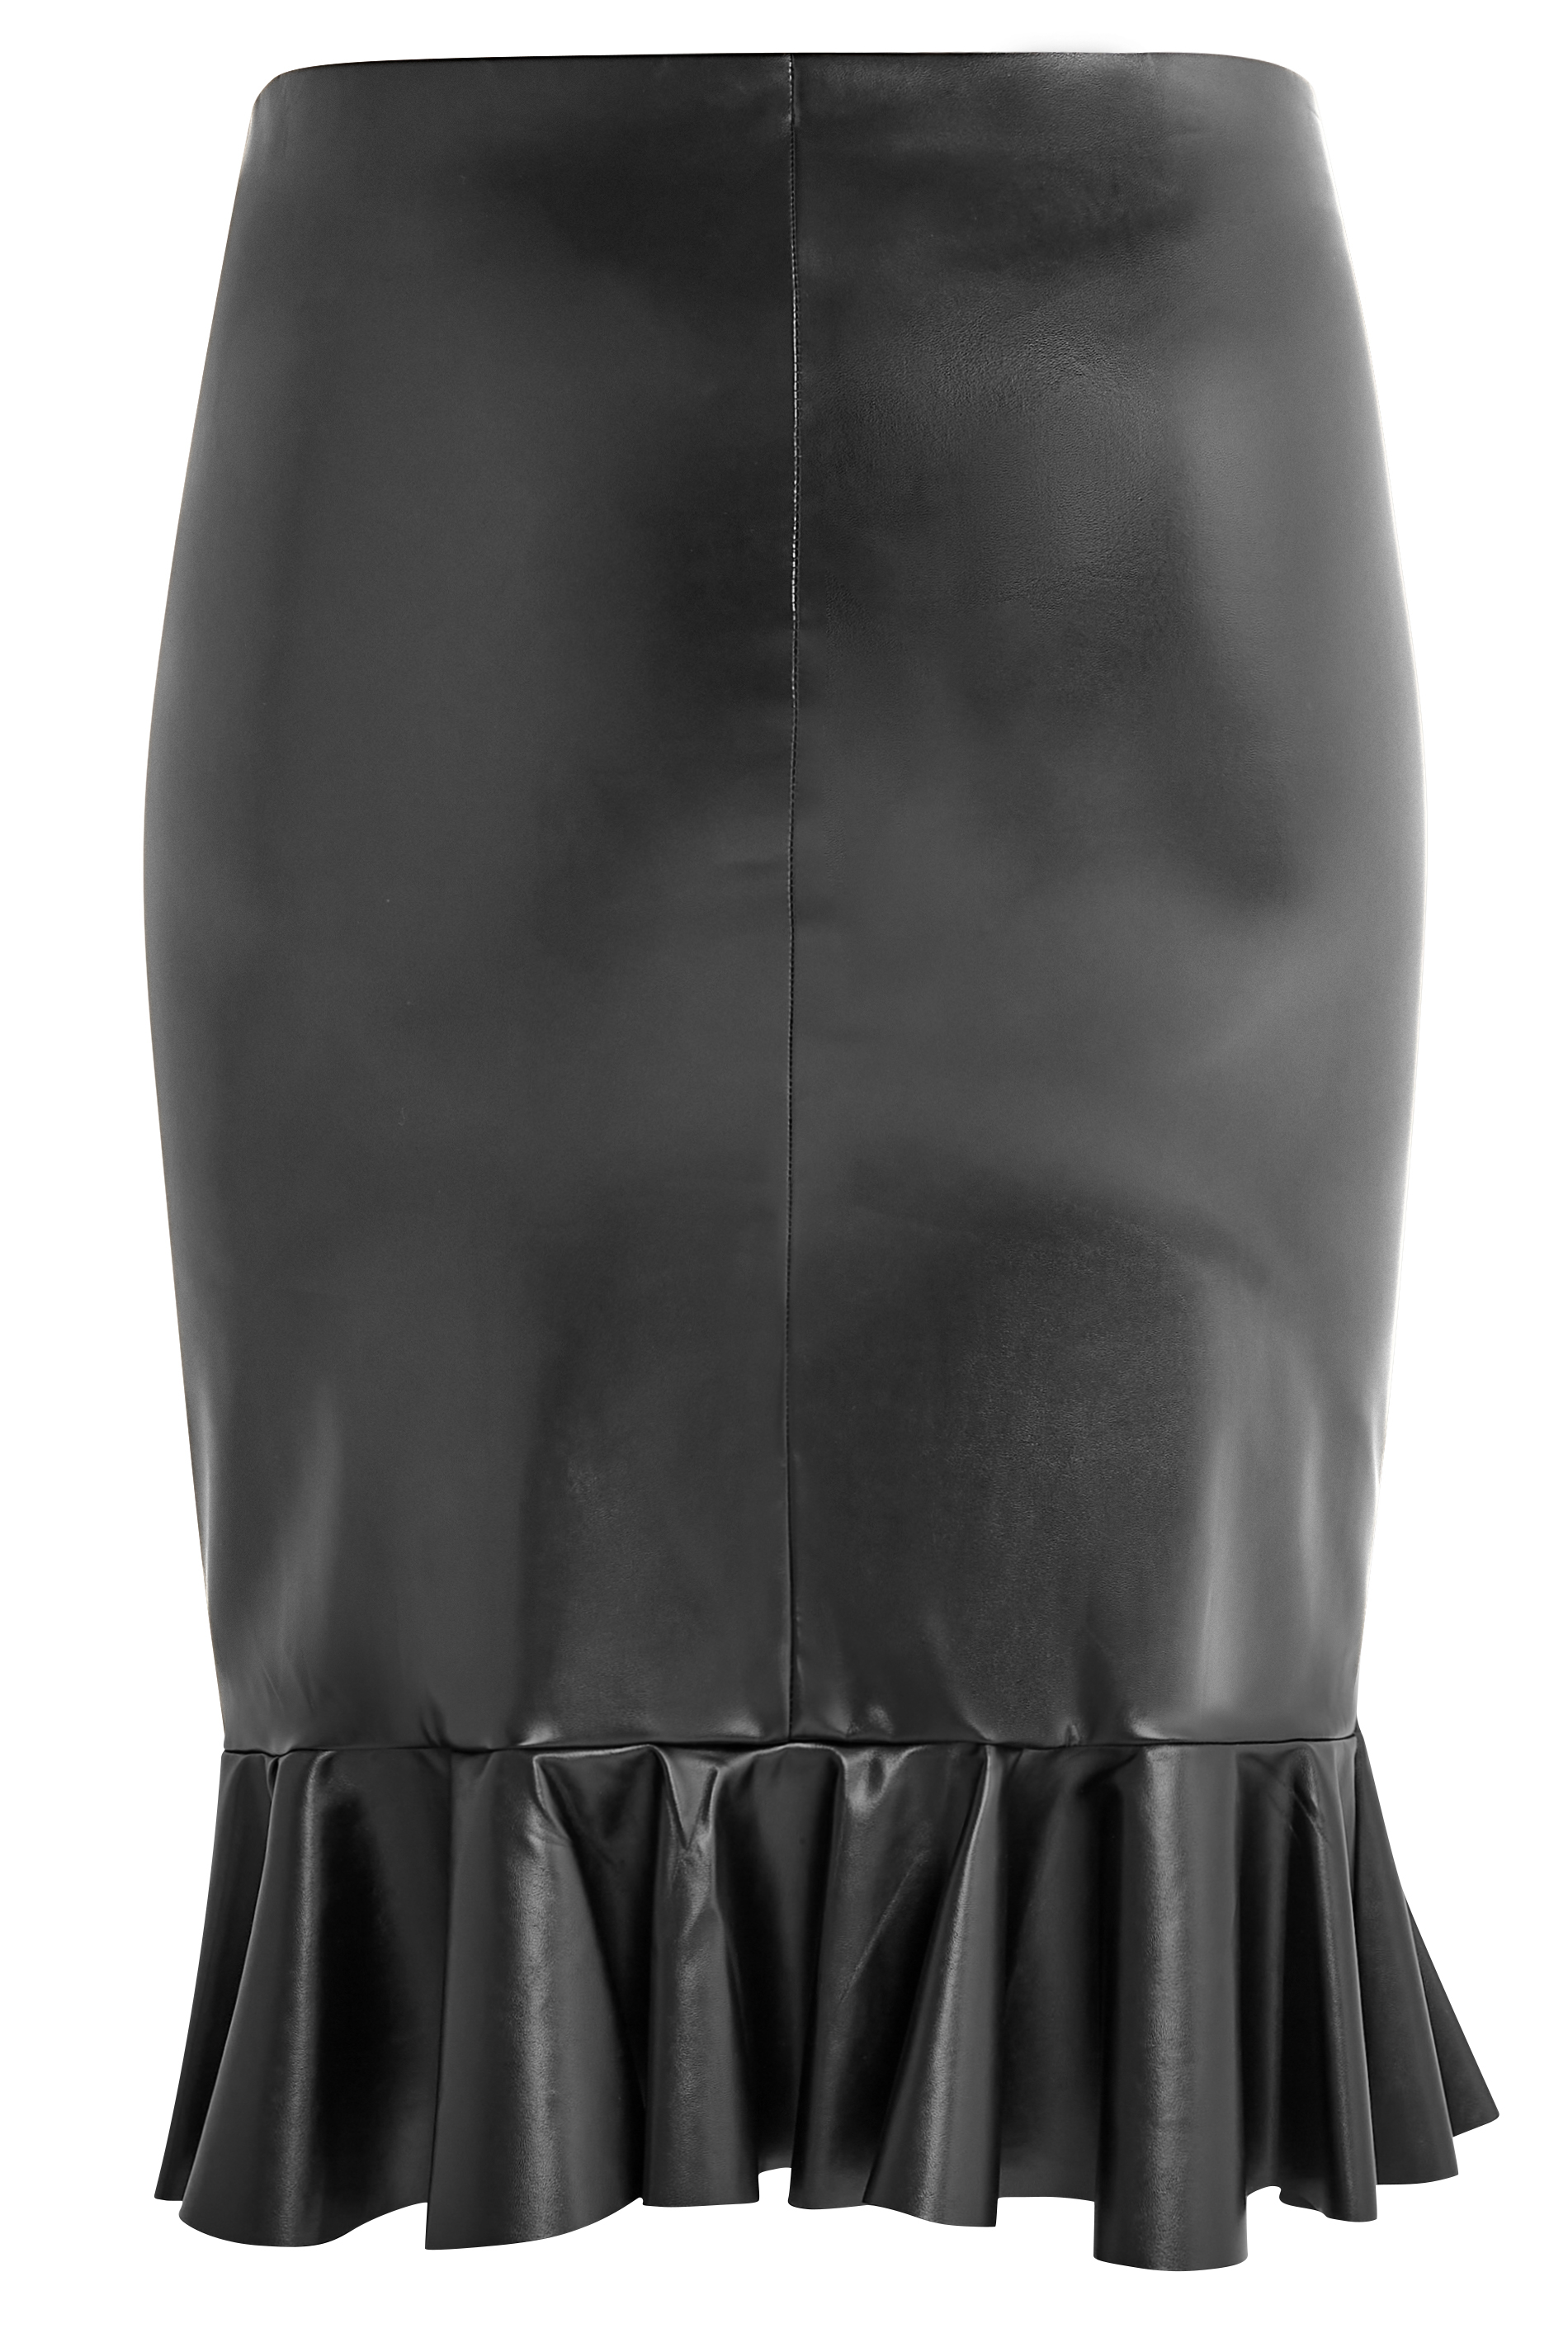 YOURS LONDON Plus Size Black Ruffle Hem Leather Look Skirt | Yours Clothing